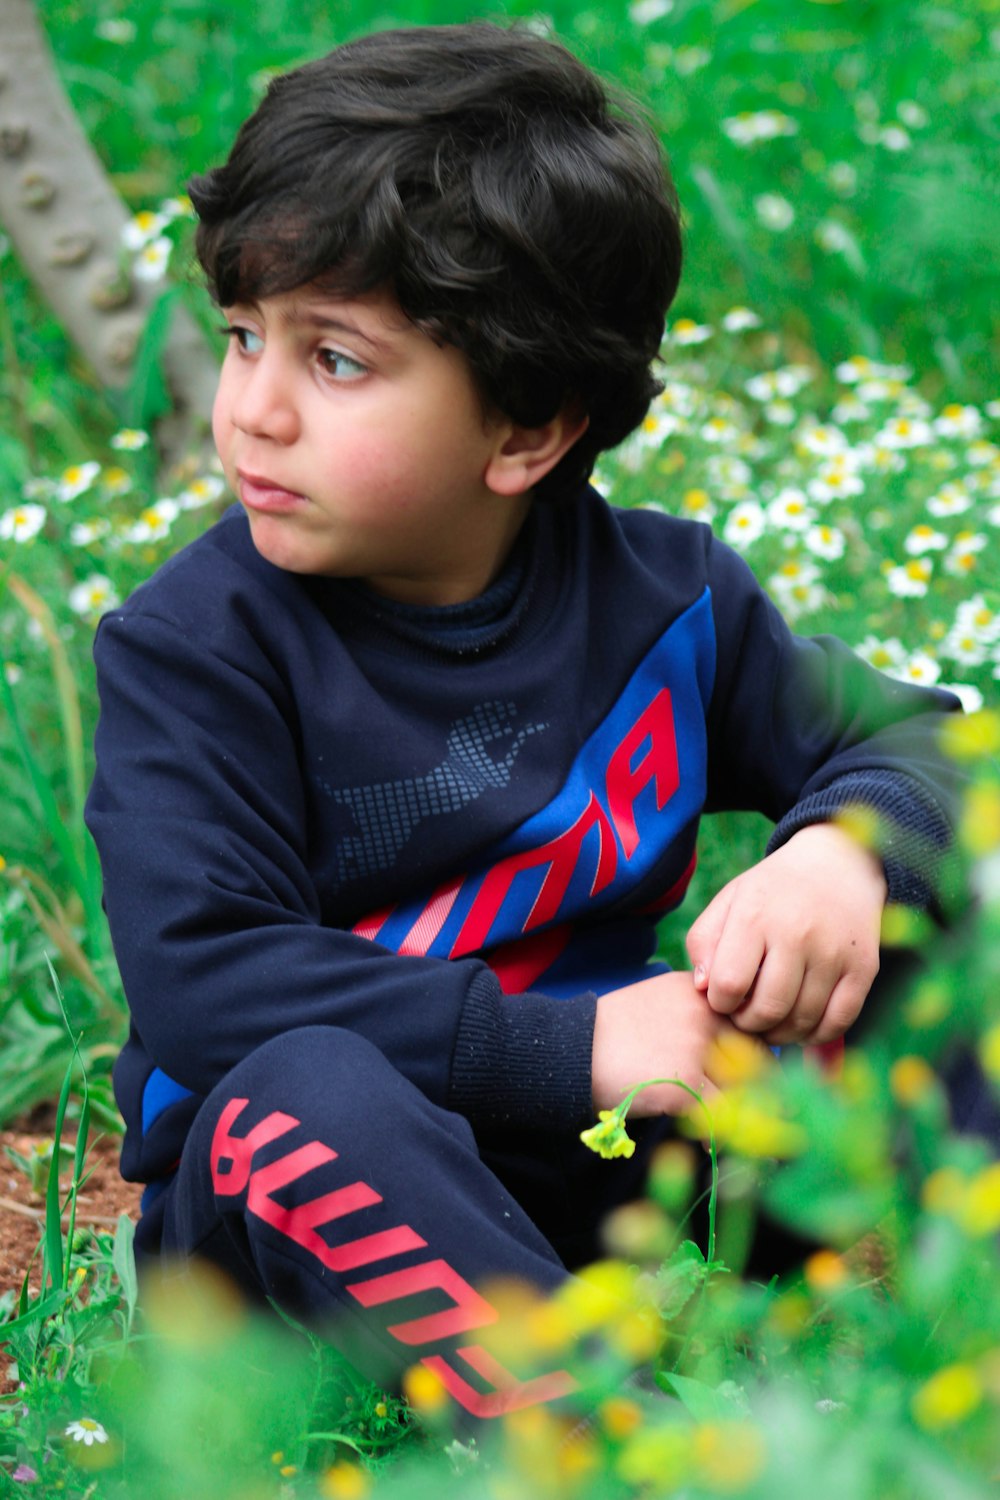 boy in black and red adidas sweater sitting on green grass during daytime